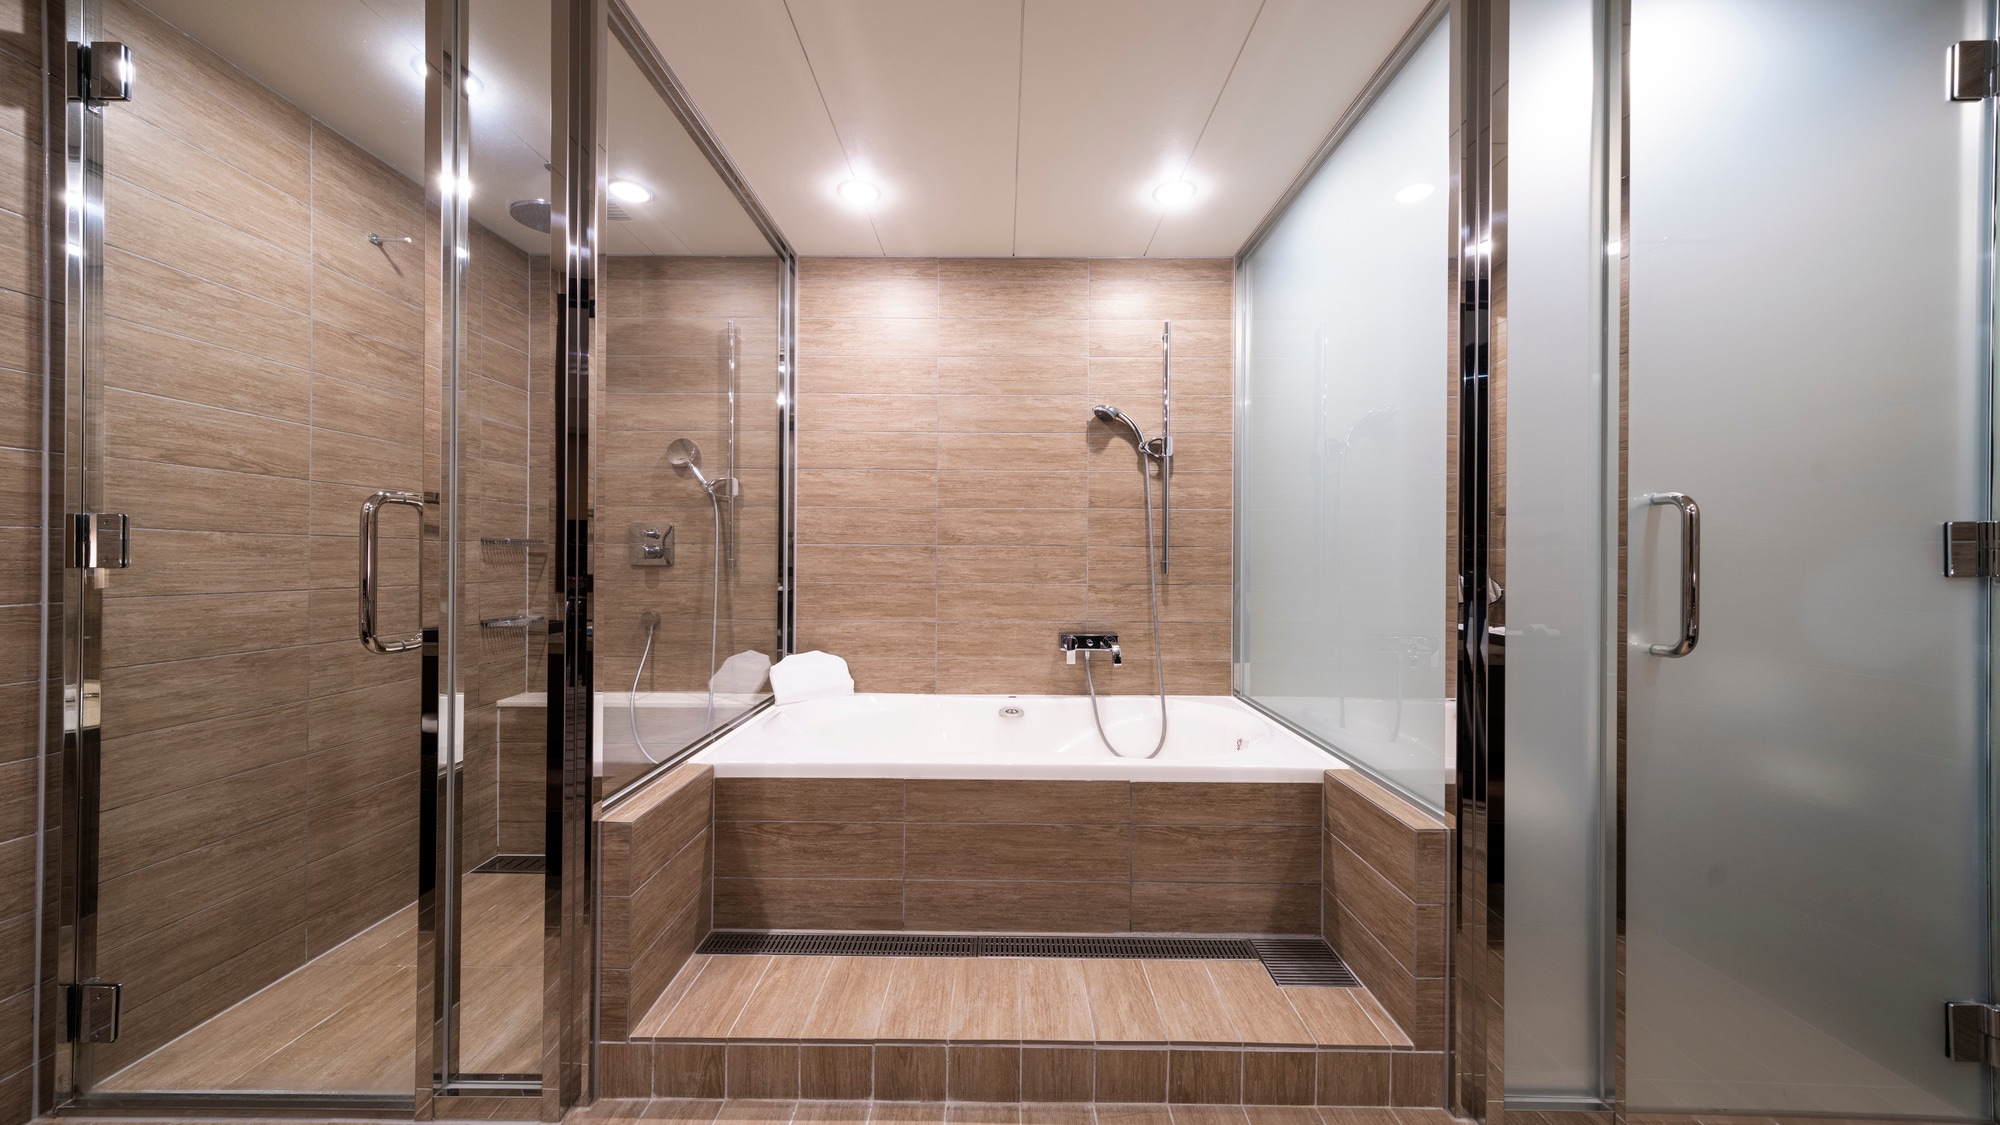 An example of a Grand Suite bathroom (independent shower type)